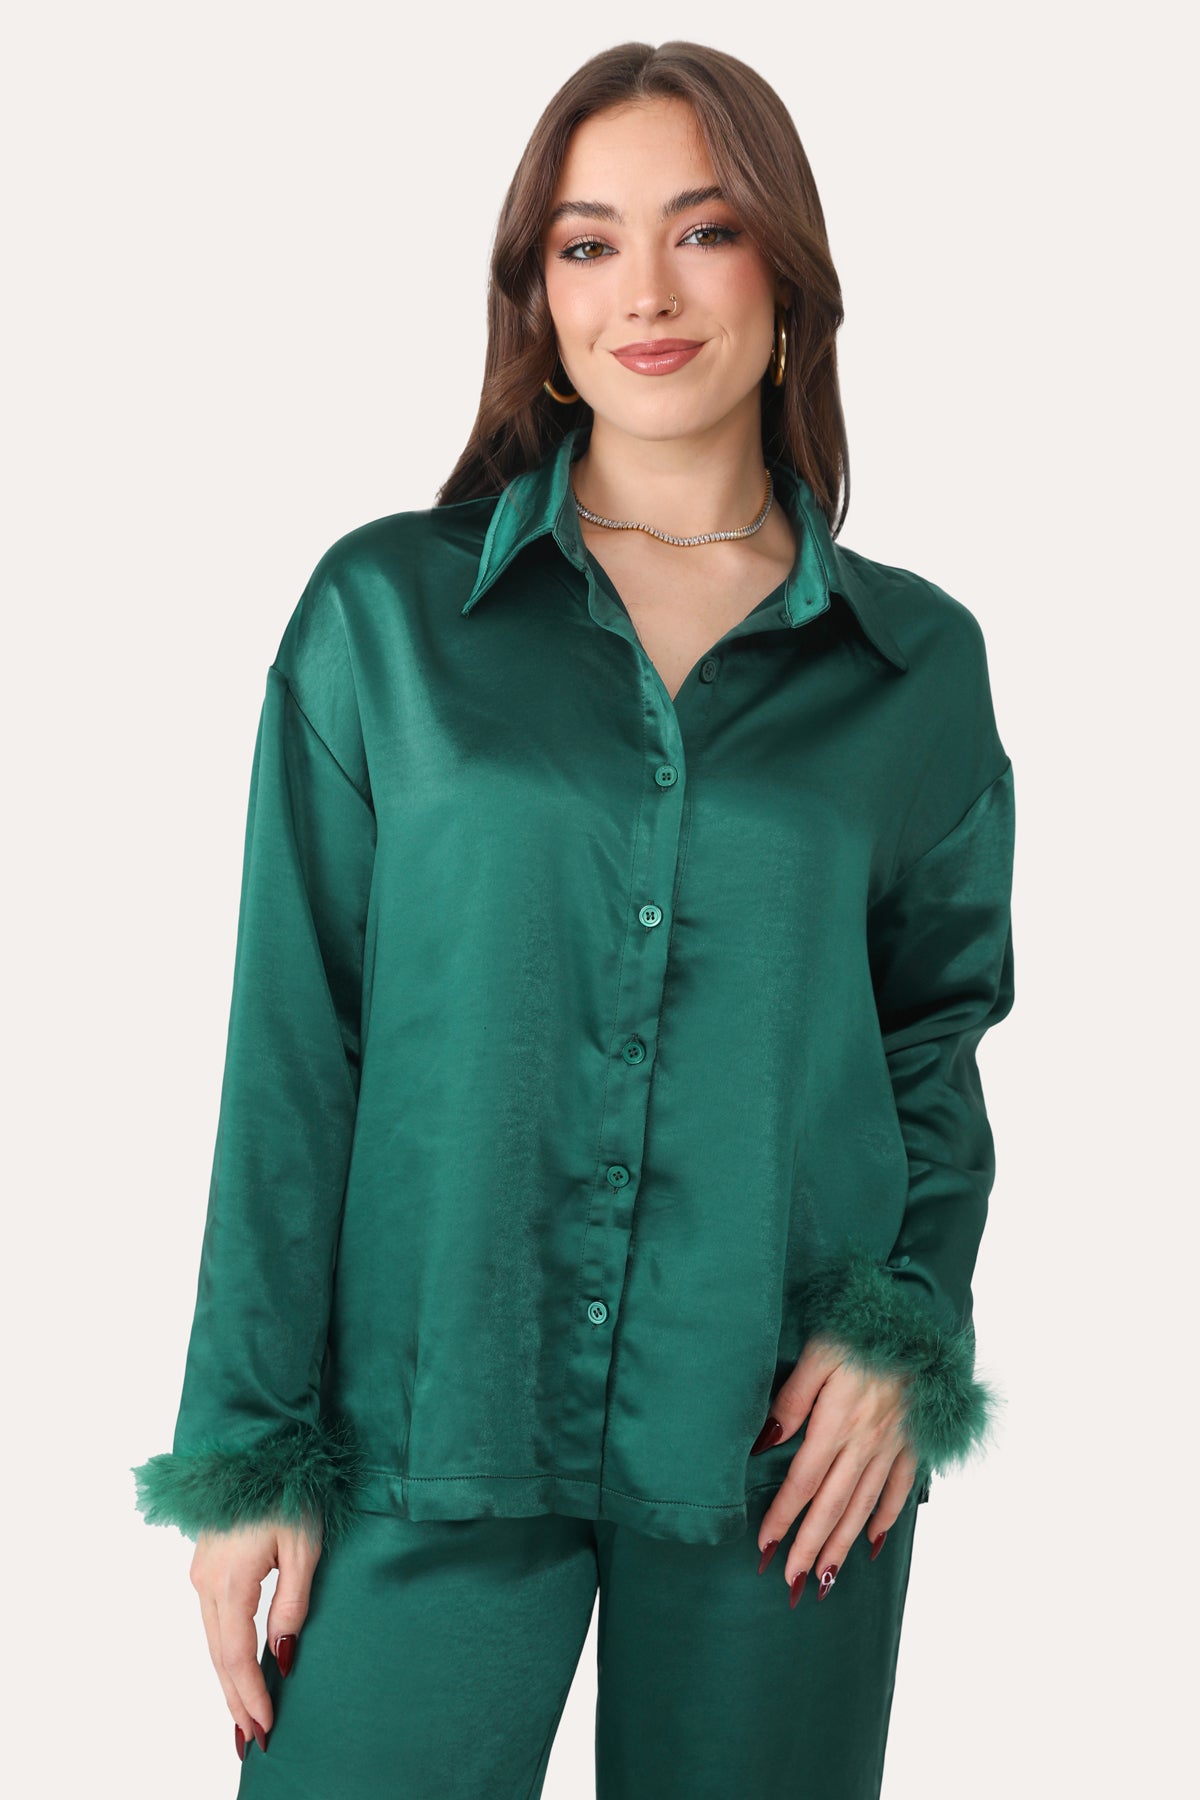 AFTER HOURS EMERALD GREEN SATIN BUTTON DOWN PJ TOP